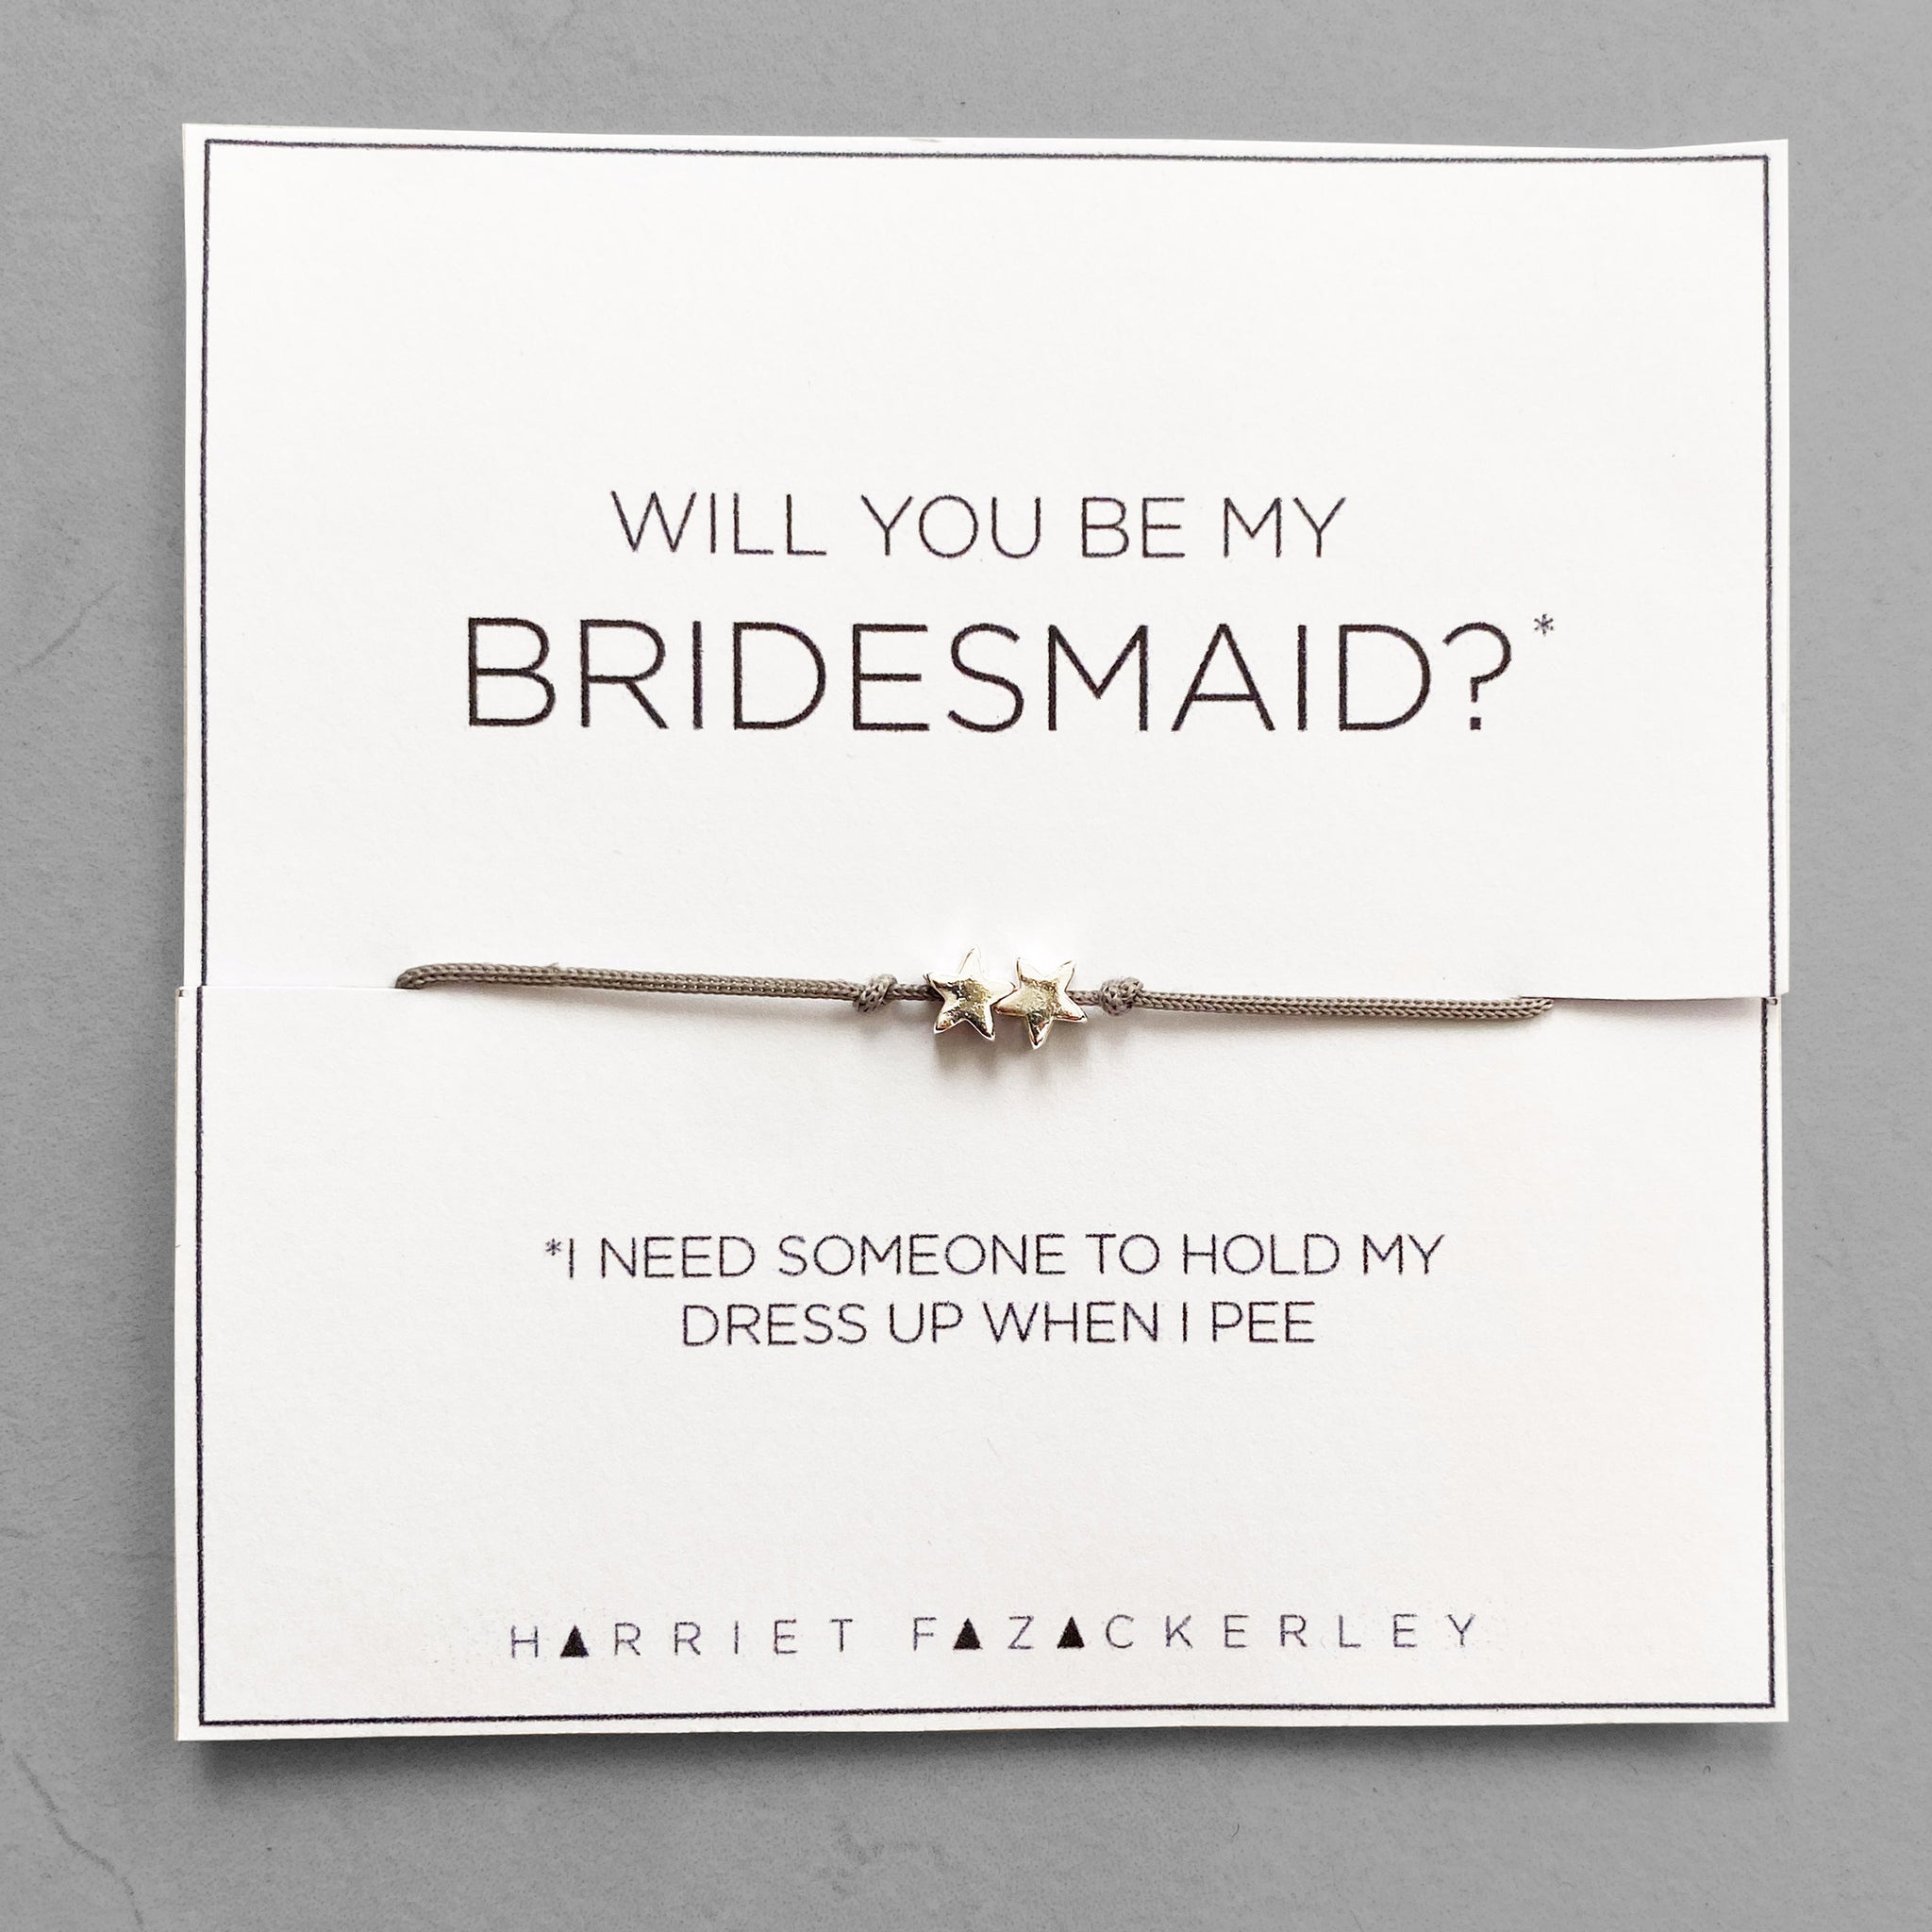 Will you be my bridesmaid? (I need someone to hold my dress up when I pee)